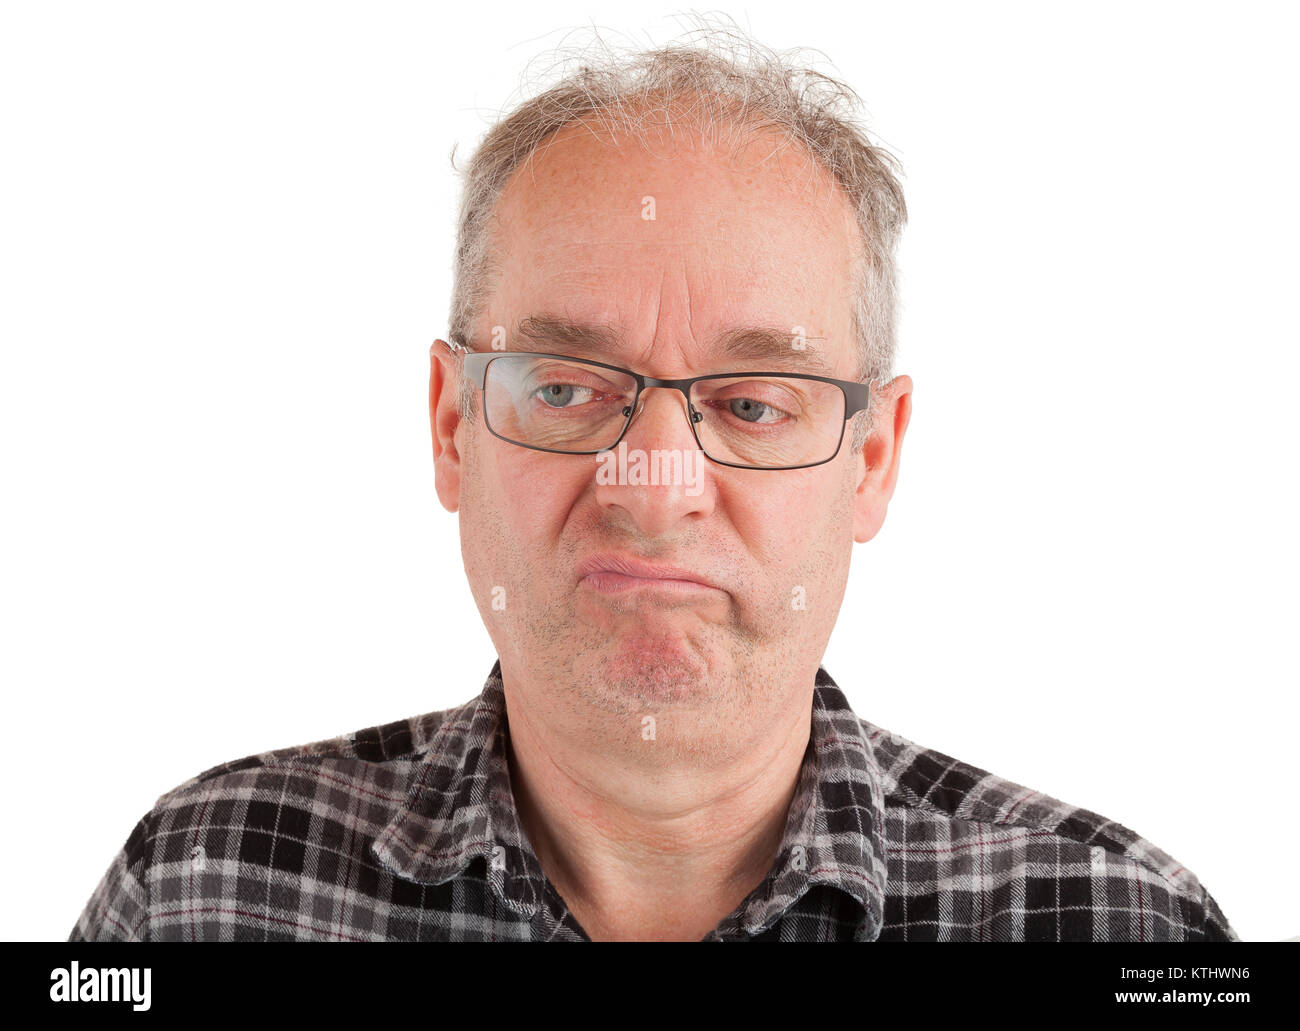 Man is displeased about something Stock Photo